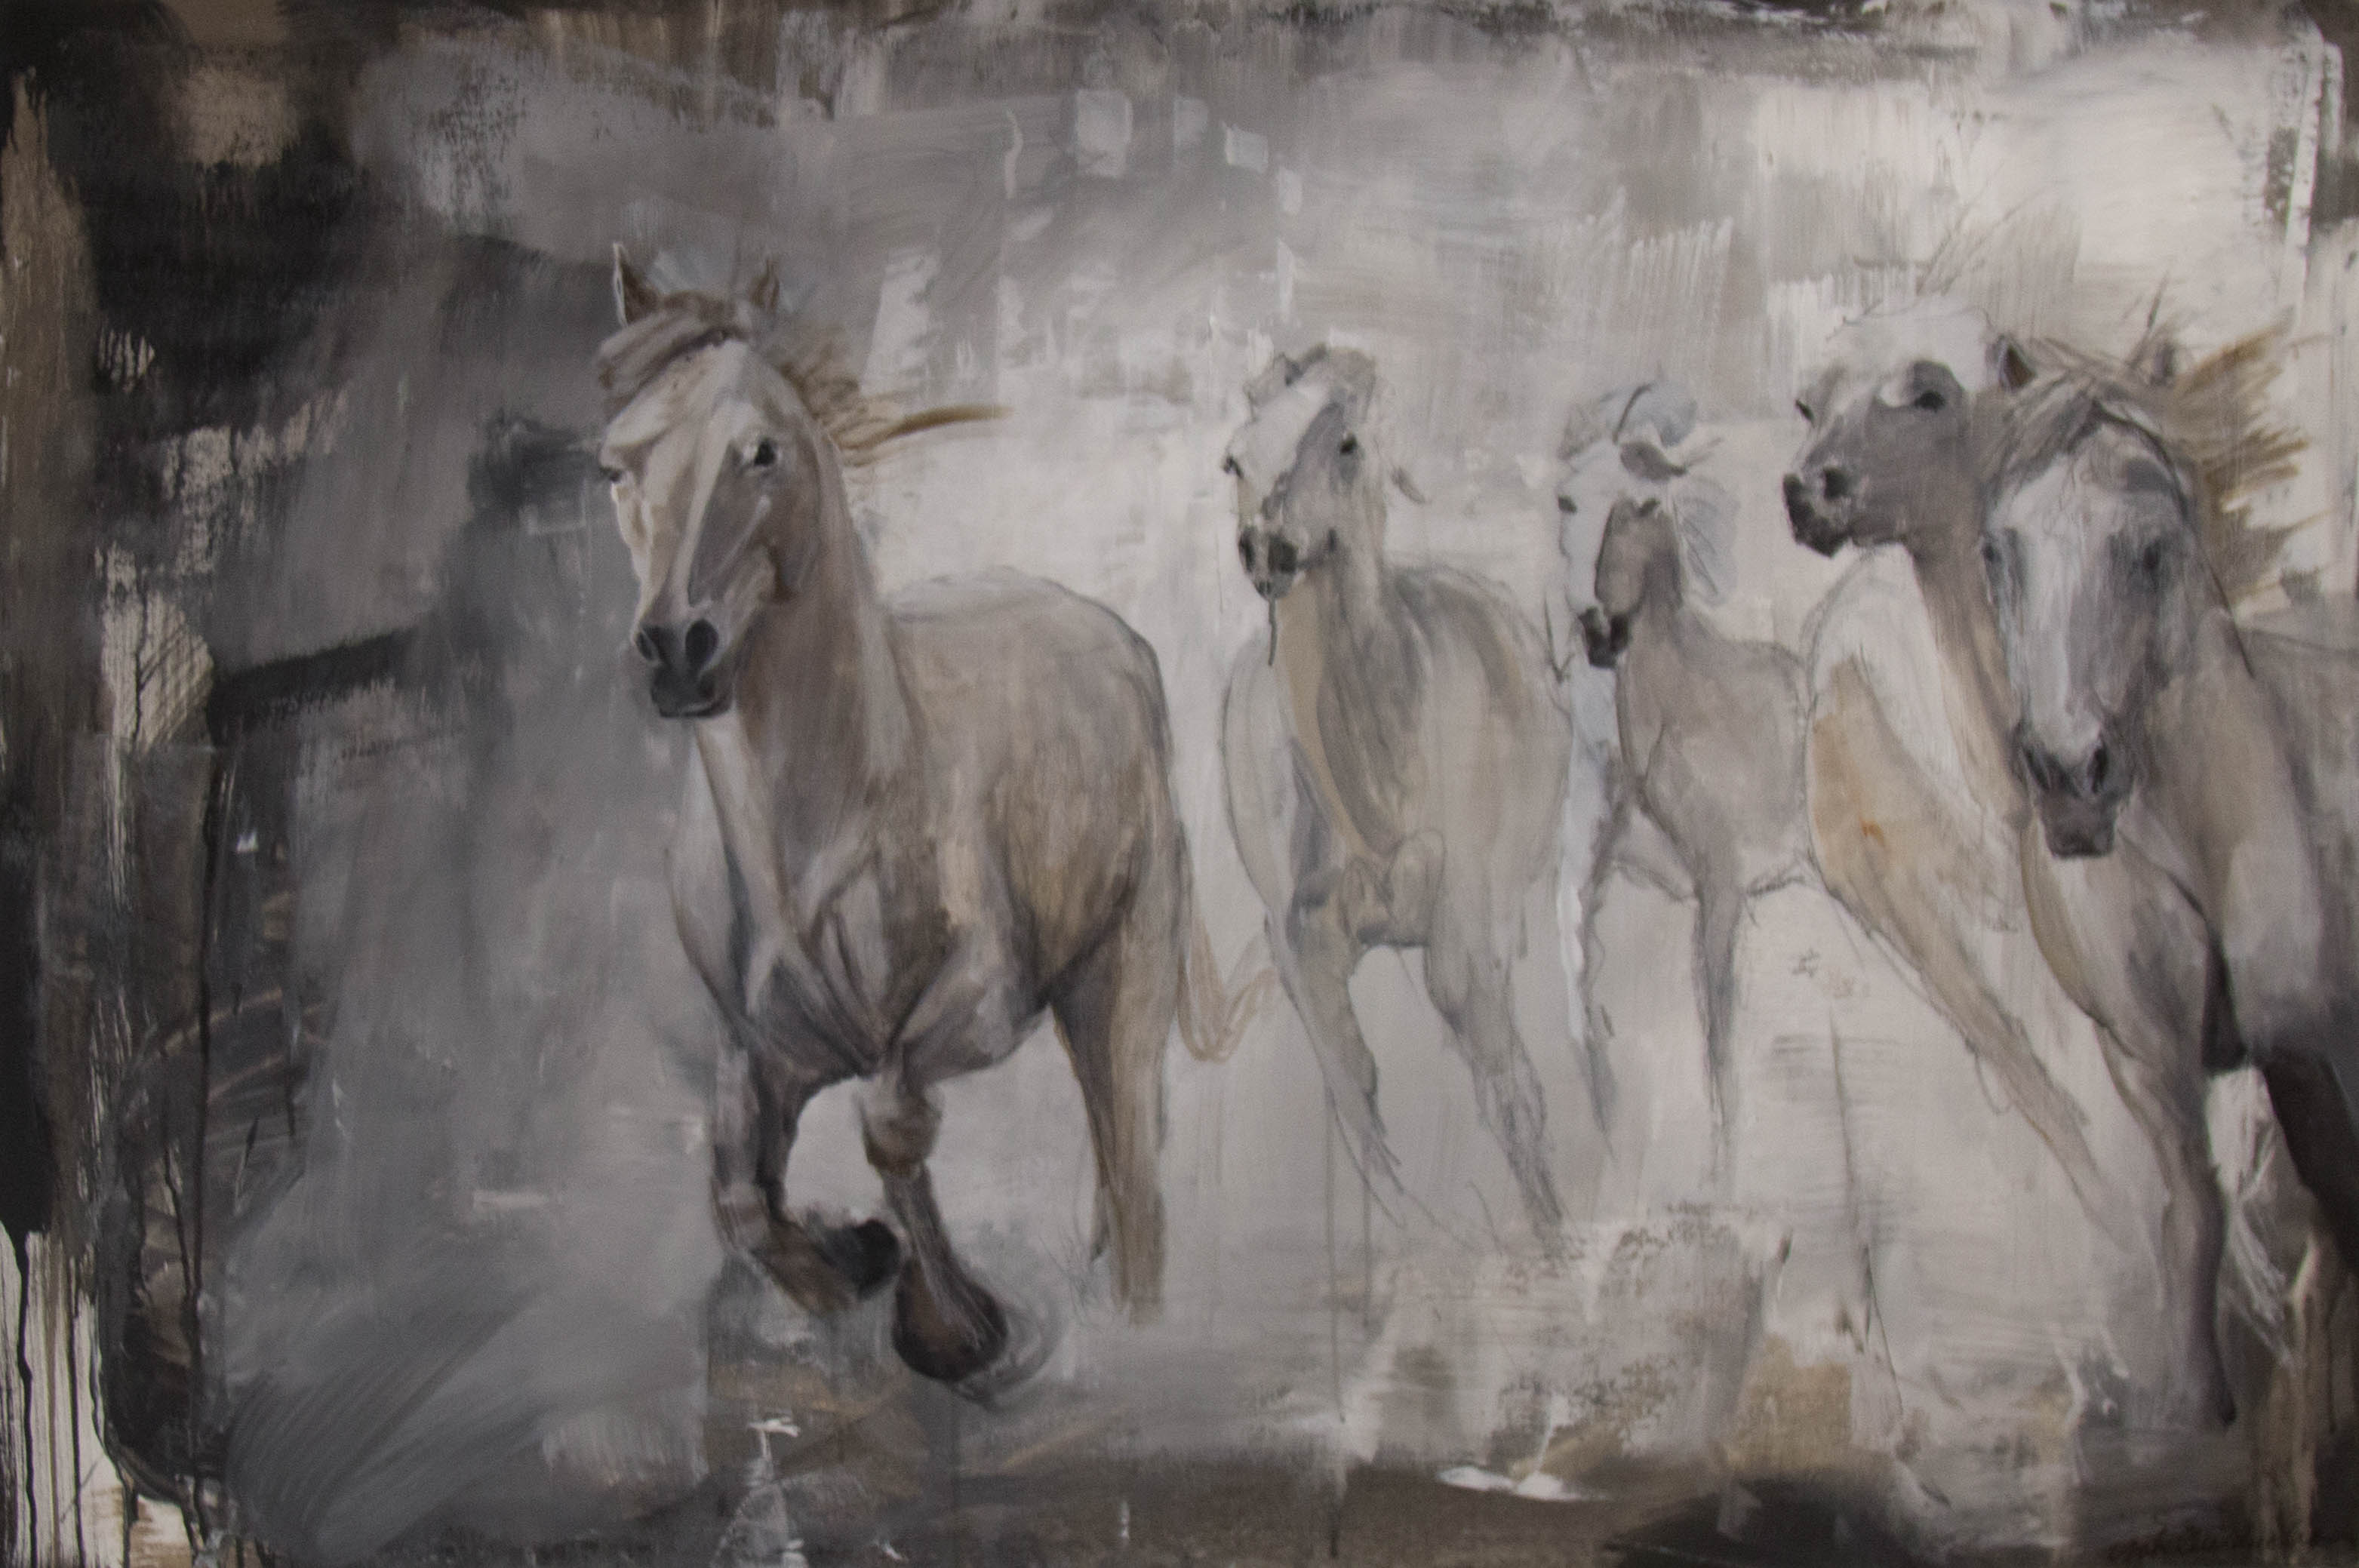 Abstracted herd of wild horses galloping. Exceptional movement and energy in the elements of this painting balanced with its subtle chromatic palette make this piece a great conversation piece.